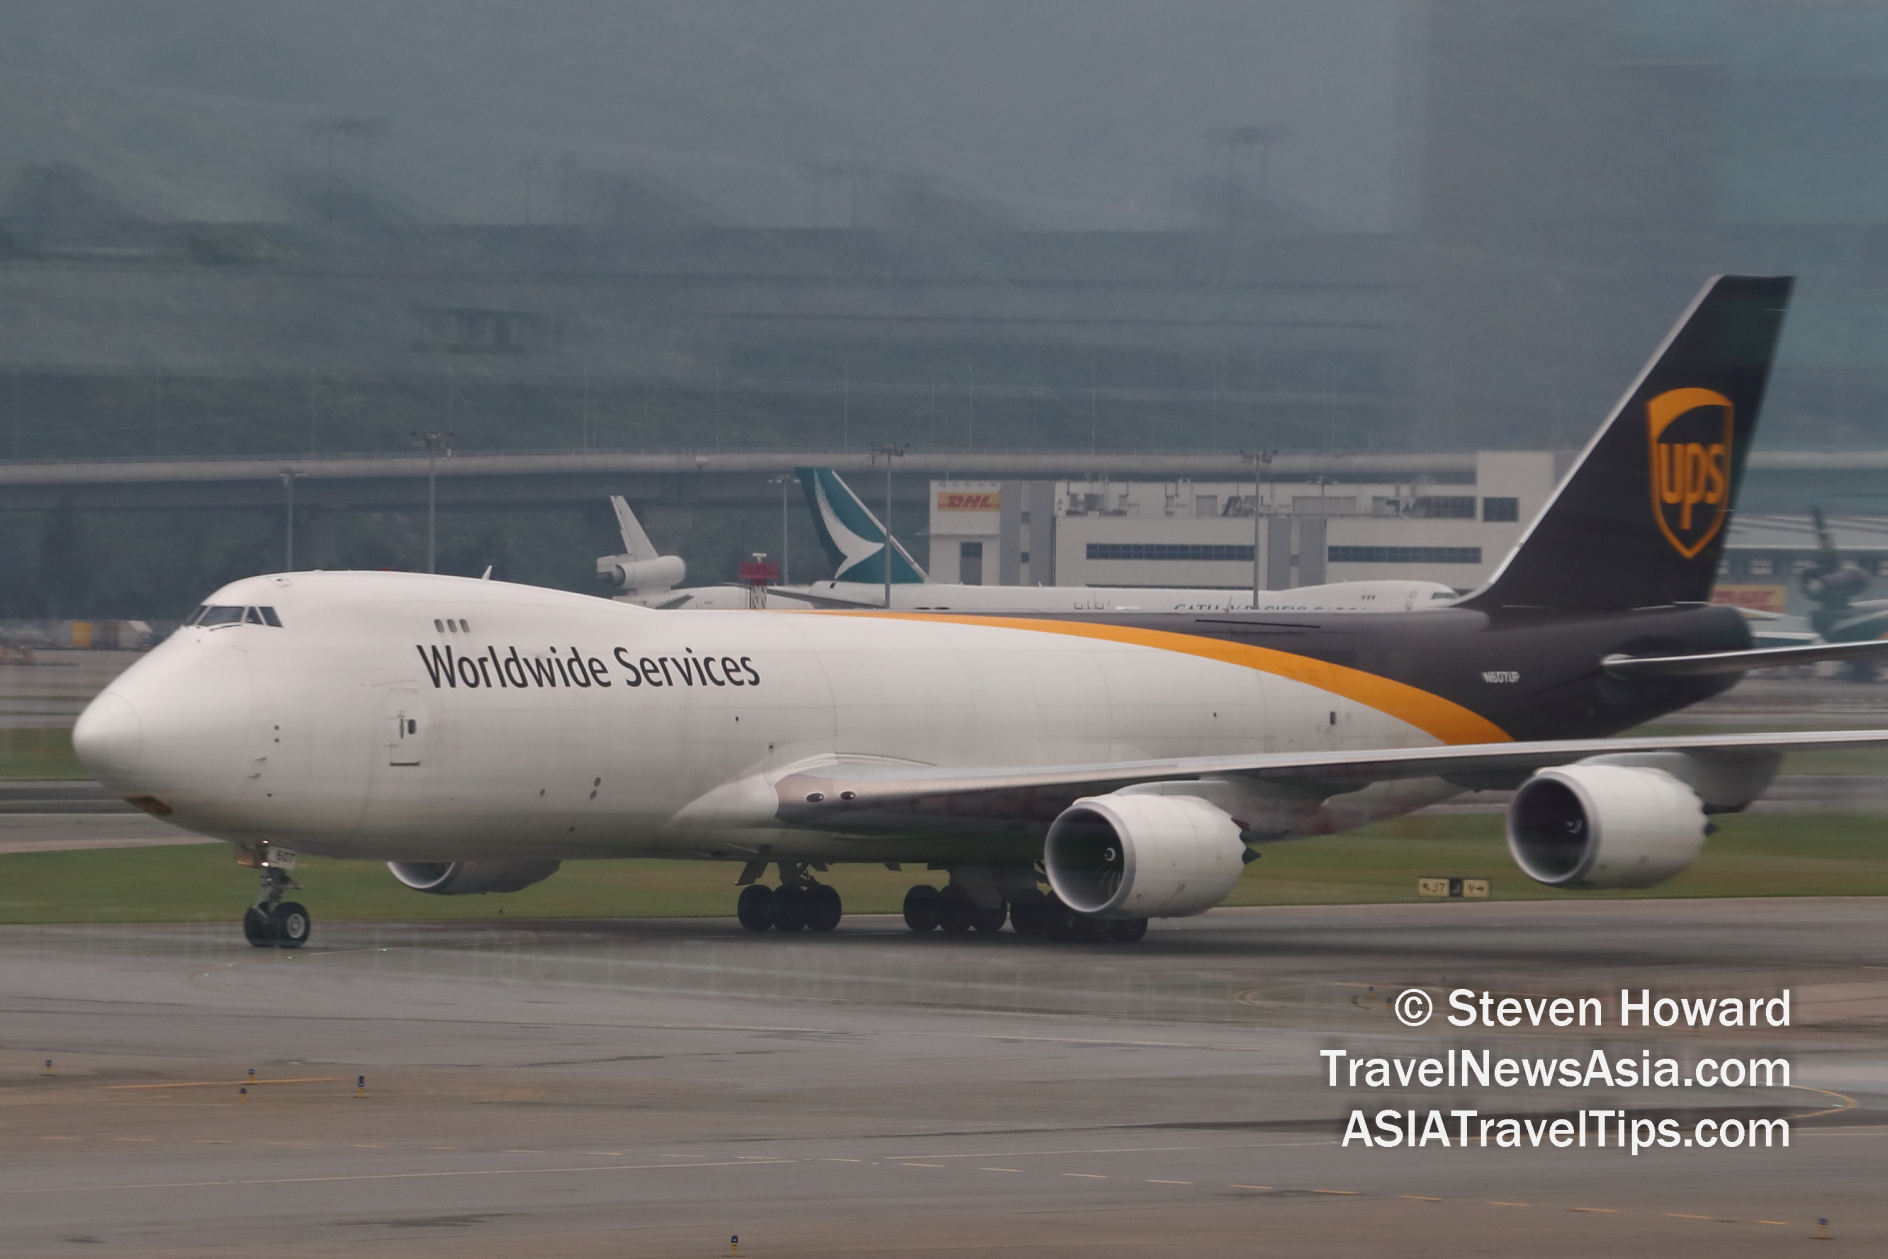 UPS Boeing 747-8F reg: N607UP at HKIA. Picture by Steven Howard of TravelNewsAsia.com Click to enlarge.